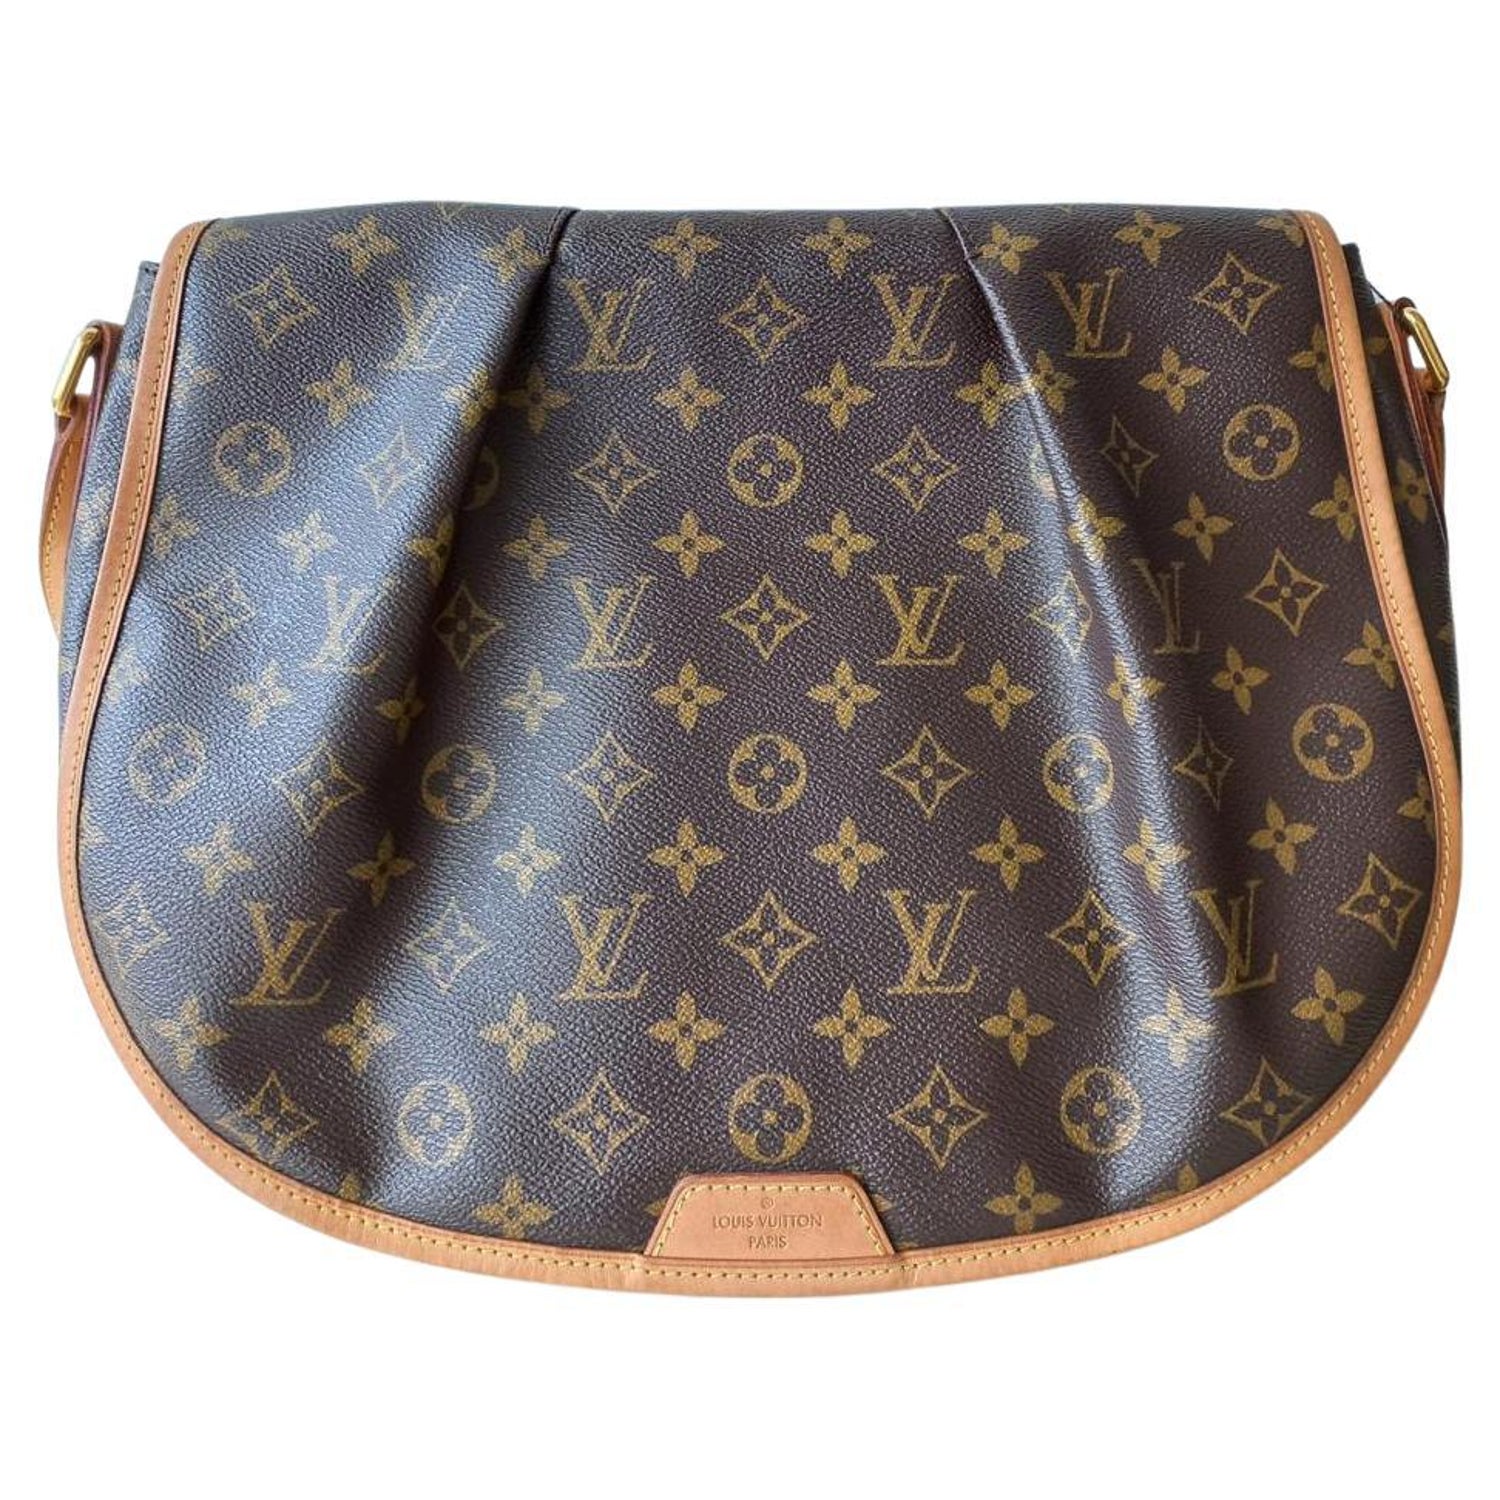 Hot Stamp Removal from Louis Vuitton Vachetta. Professional